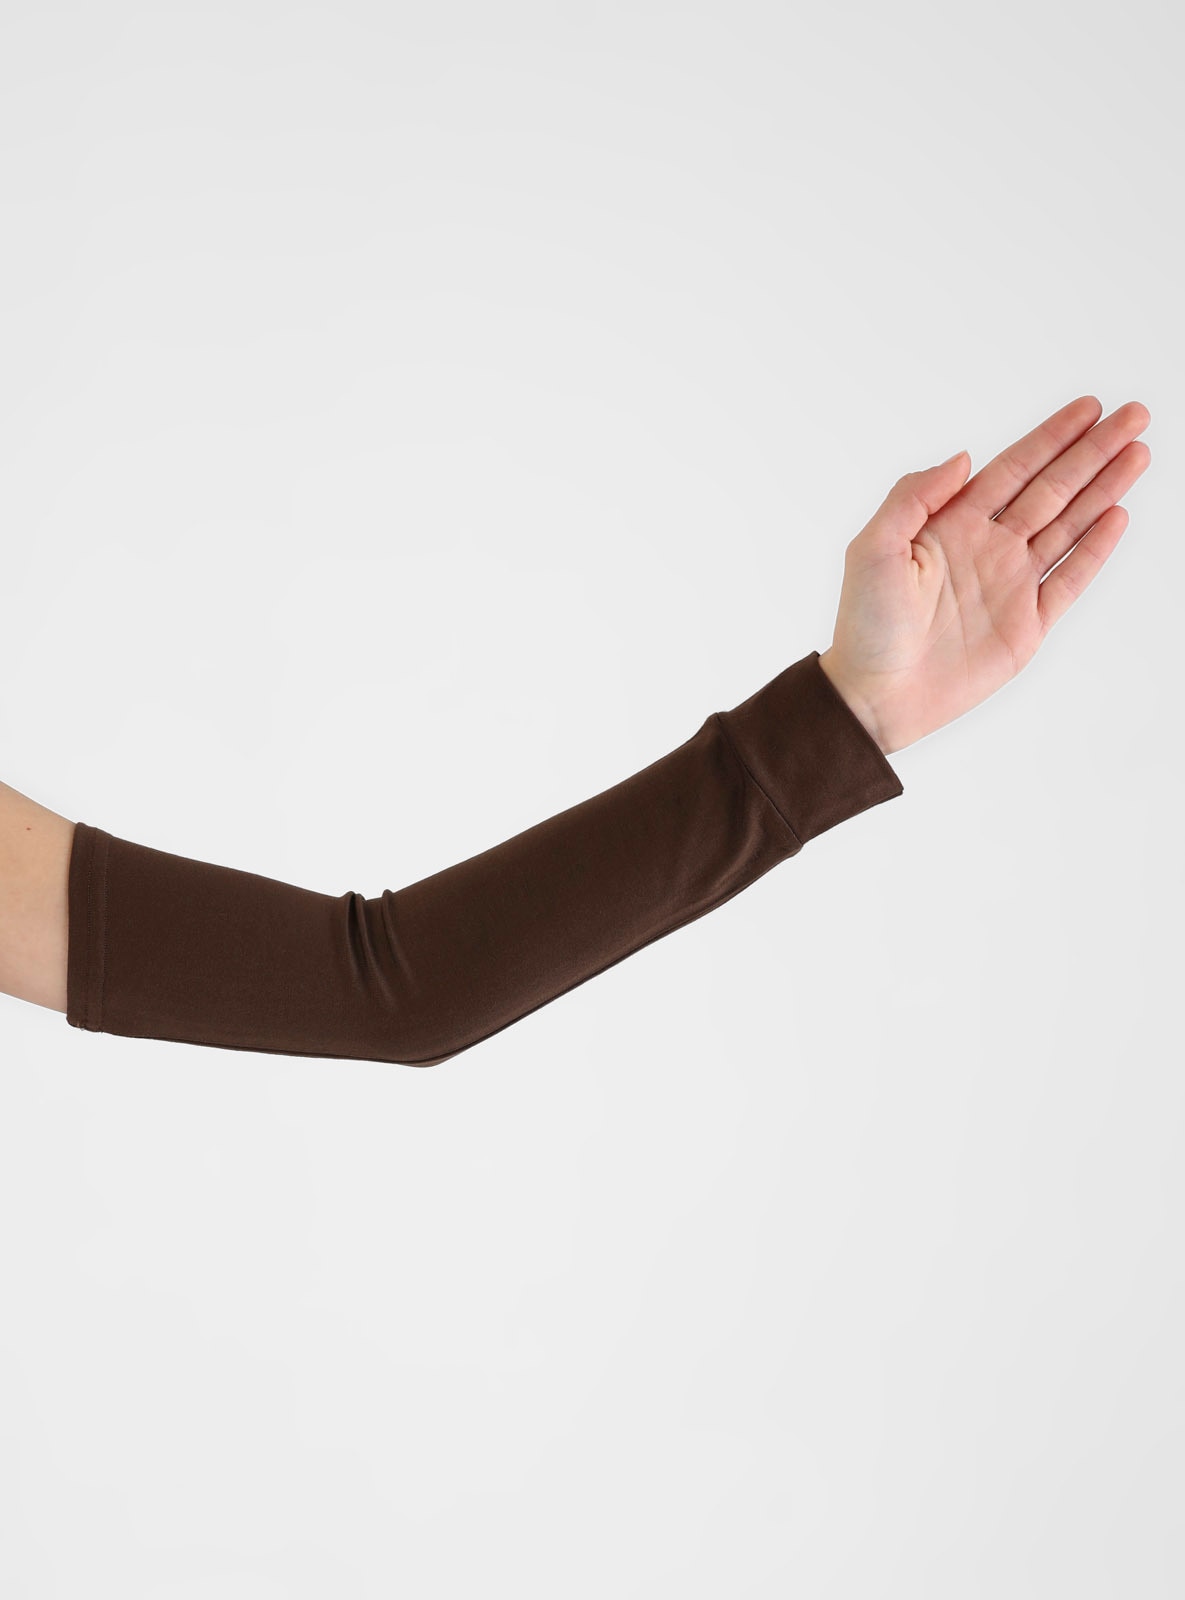 Sleeve Cover - Light Brown